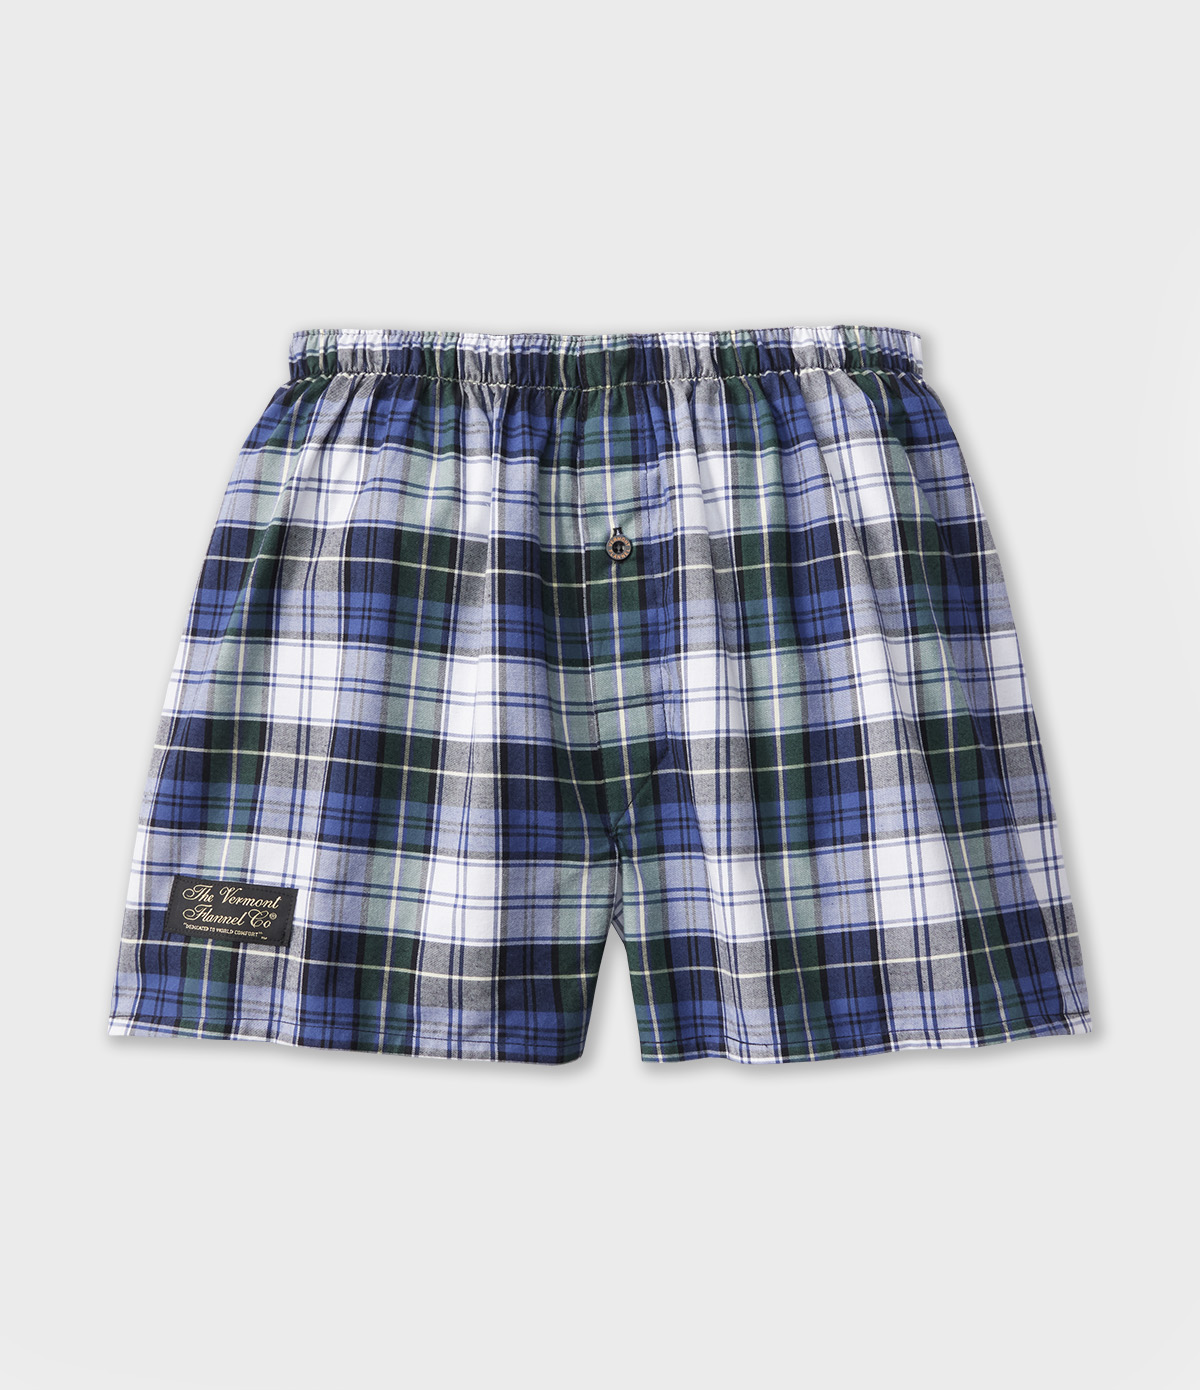 A-dam Boys Boxer briefs with hats made from GOTS organic cotton